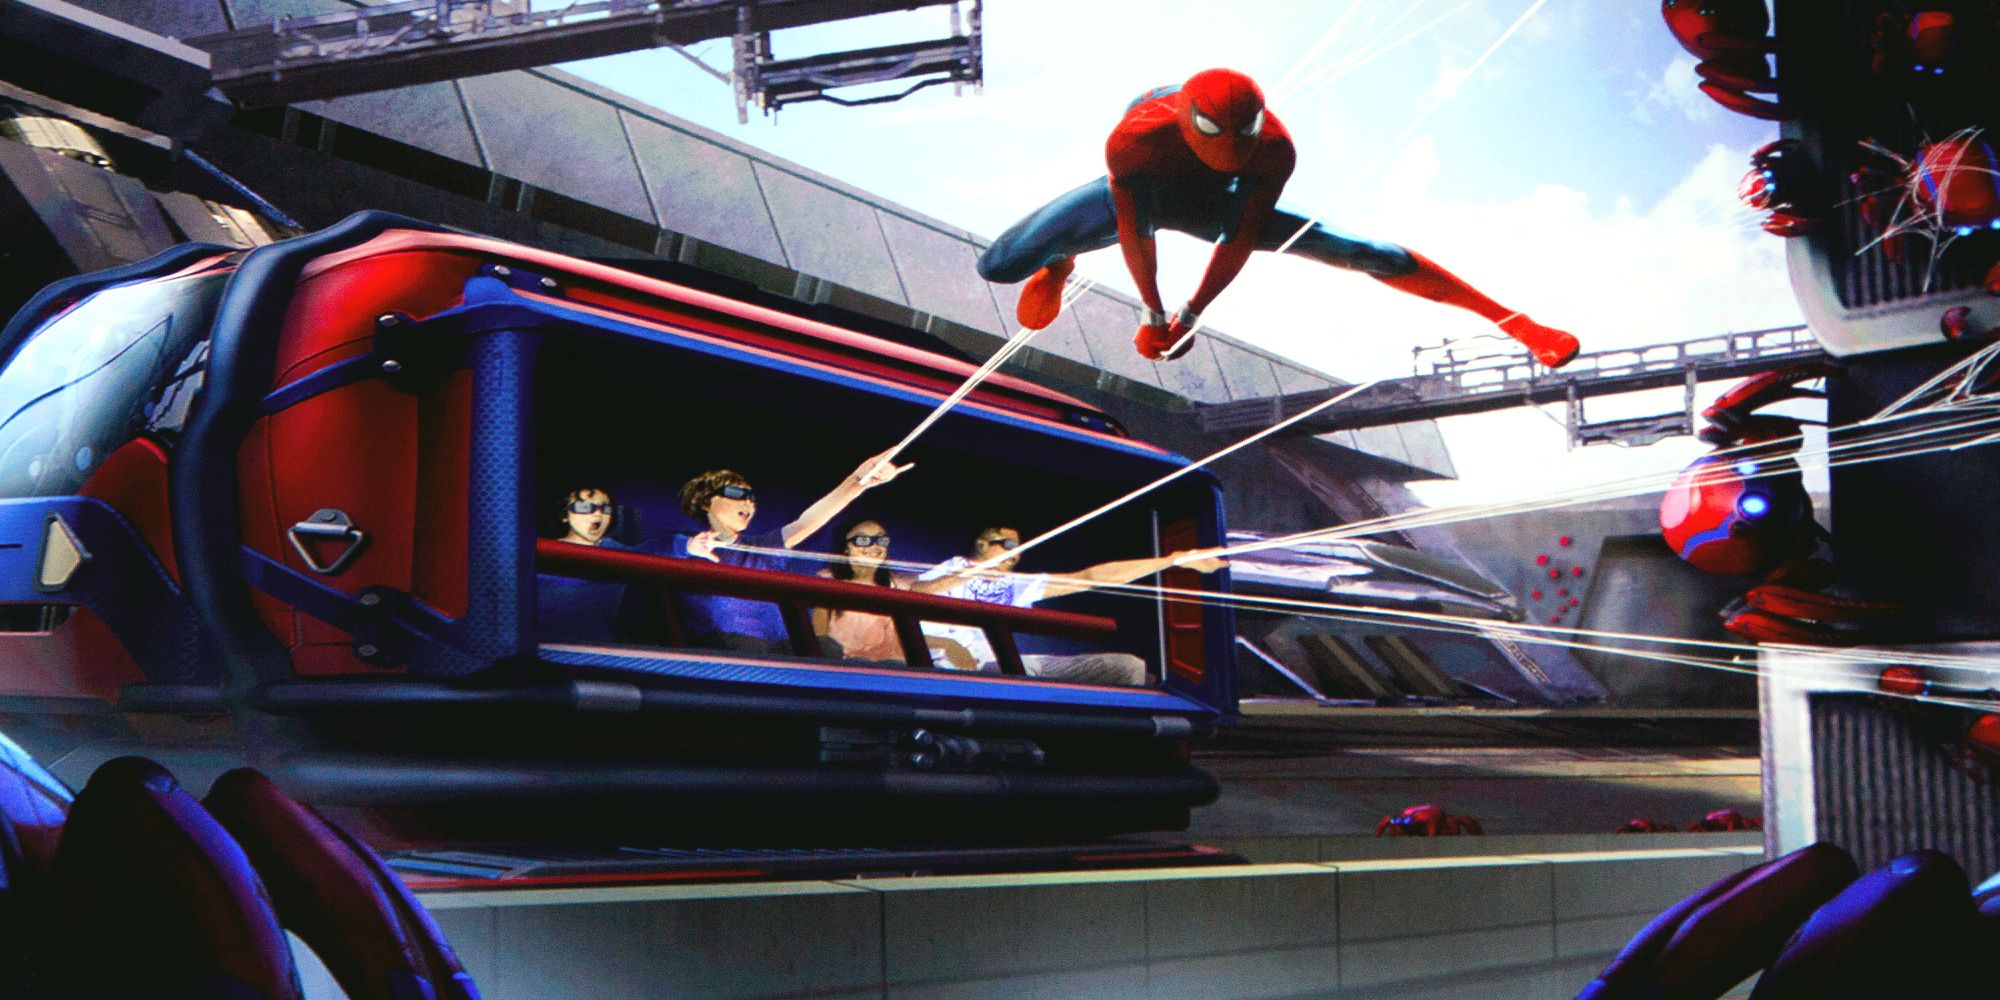 A picture of the Spider-Man ride in Disneyland featuring Spider-Man